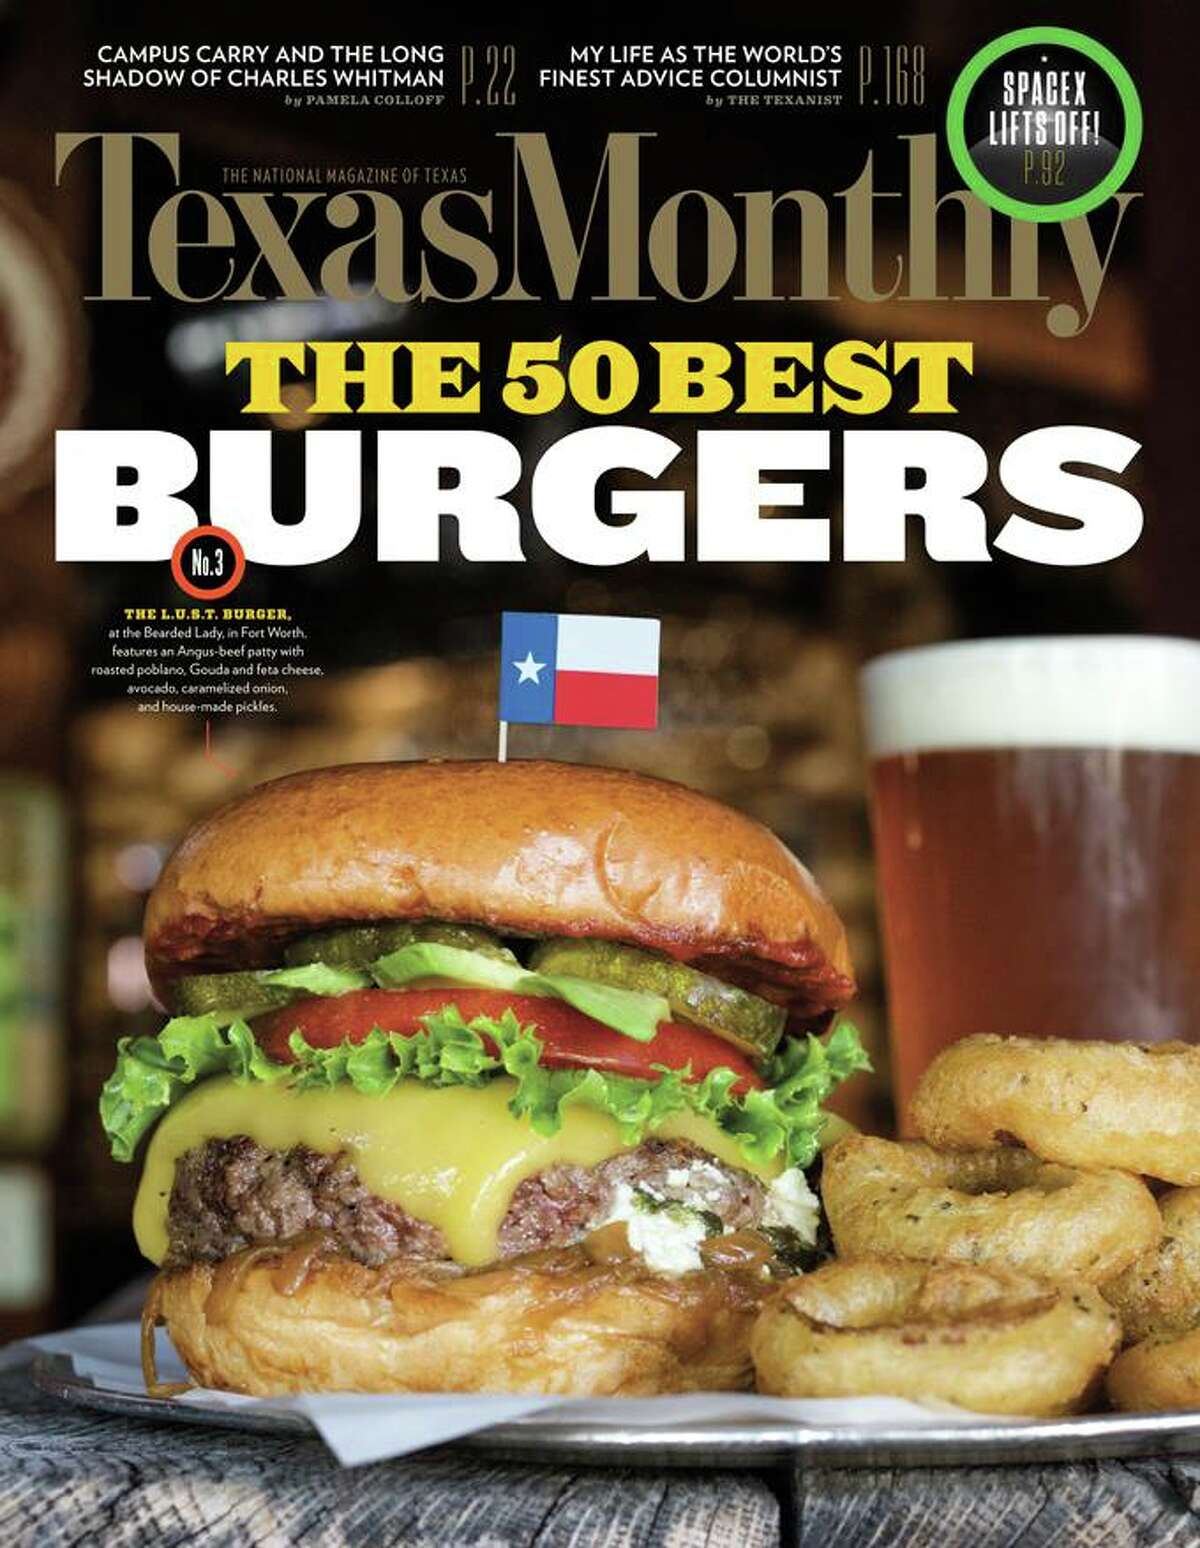 Texas Monthly News is hiring store cashiers and warehouse associates.